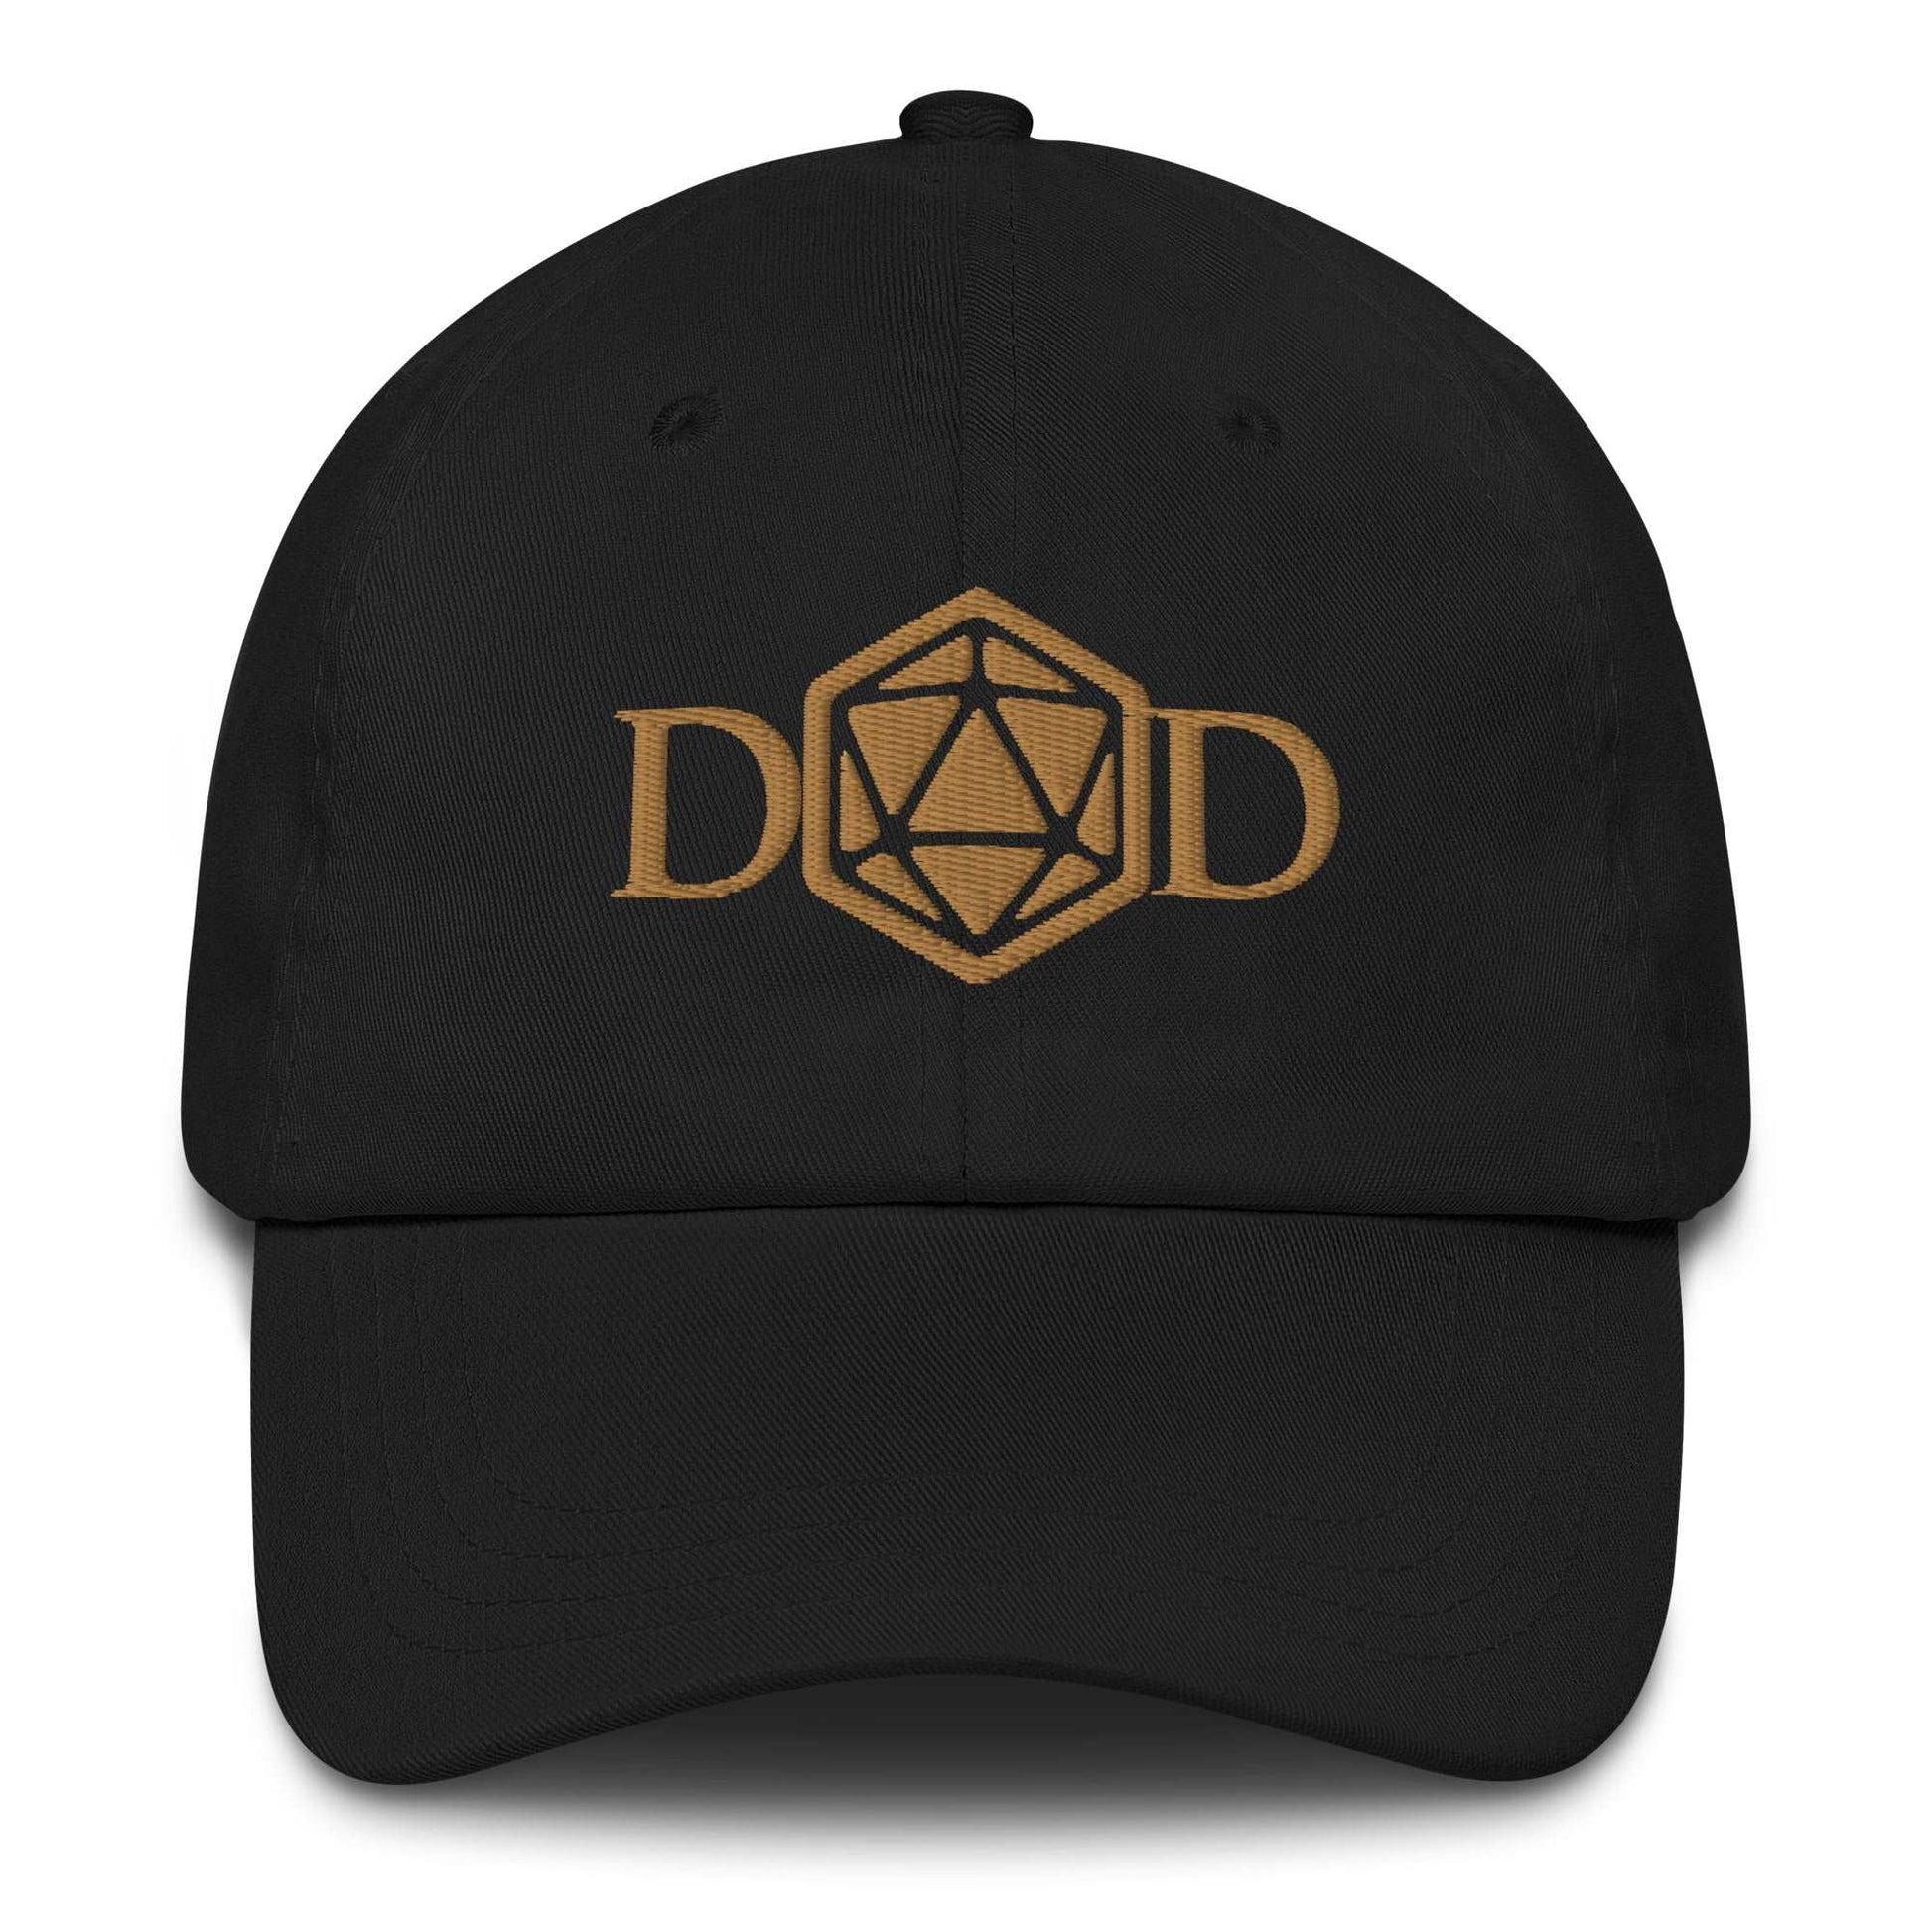 DnD Dad Embroidered Hat - D20 Cap for Gaming Fathers Hat Black